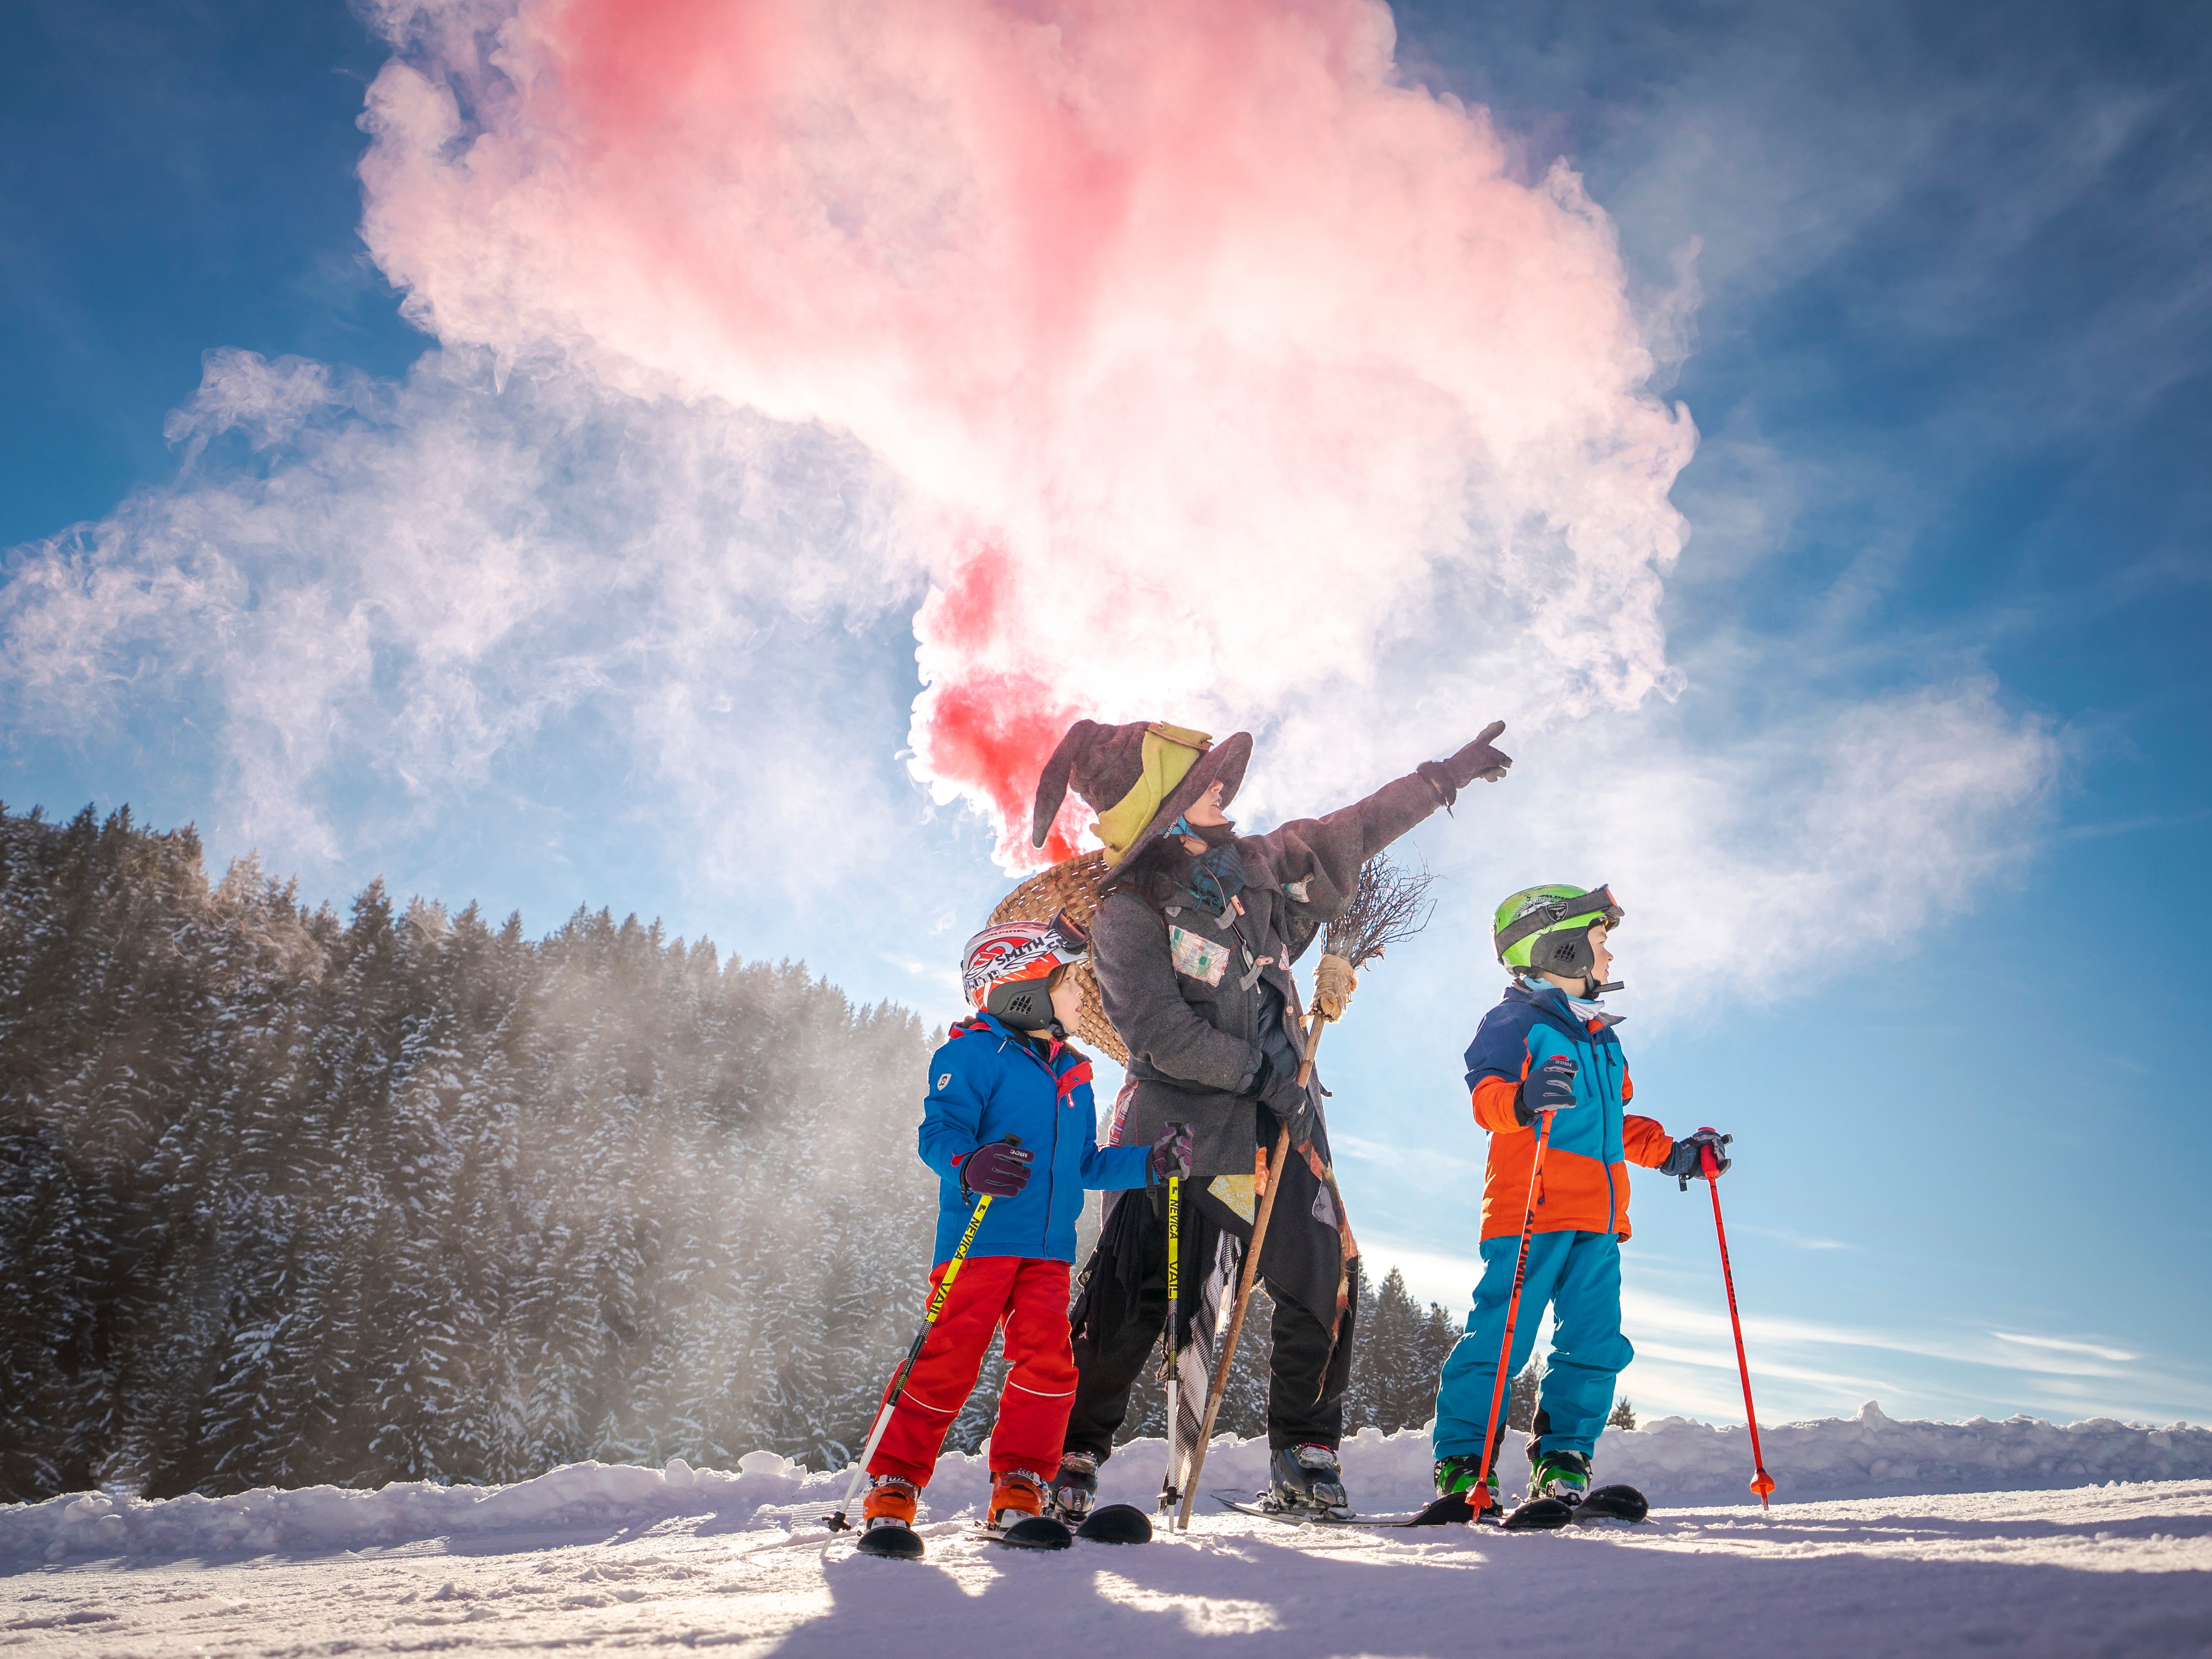 Kids will love meeting the friendly ‘witches’ on skis at Hexenwasser S?ll amusement park